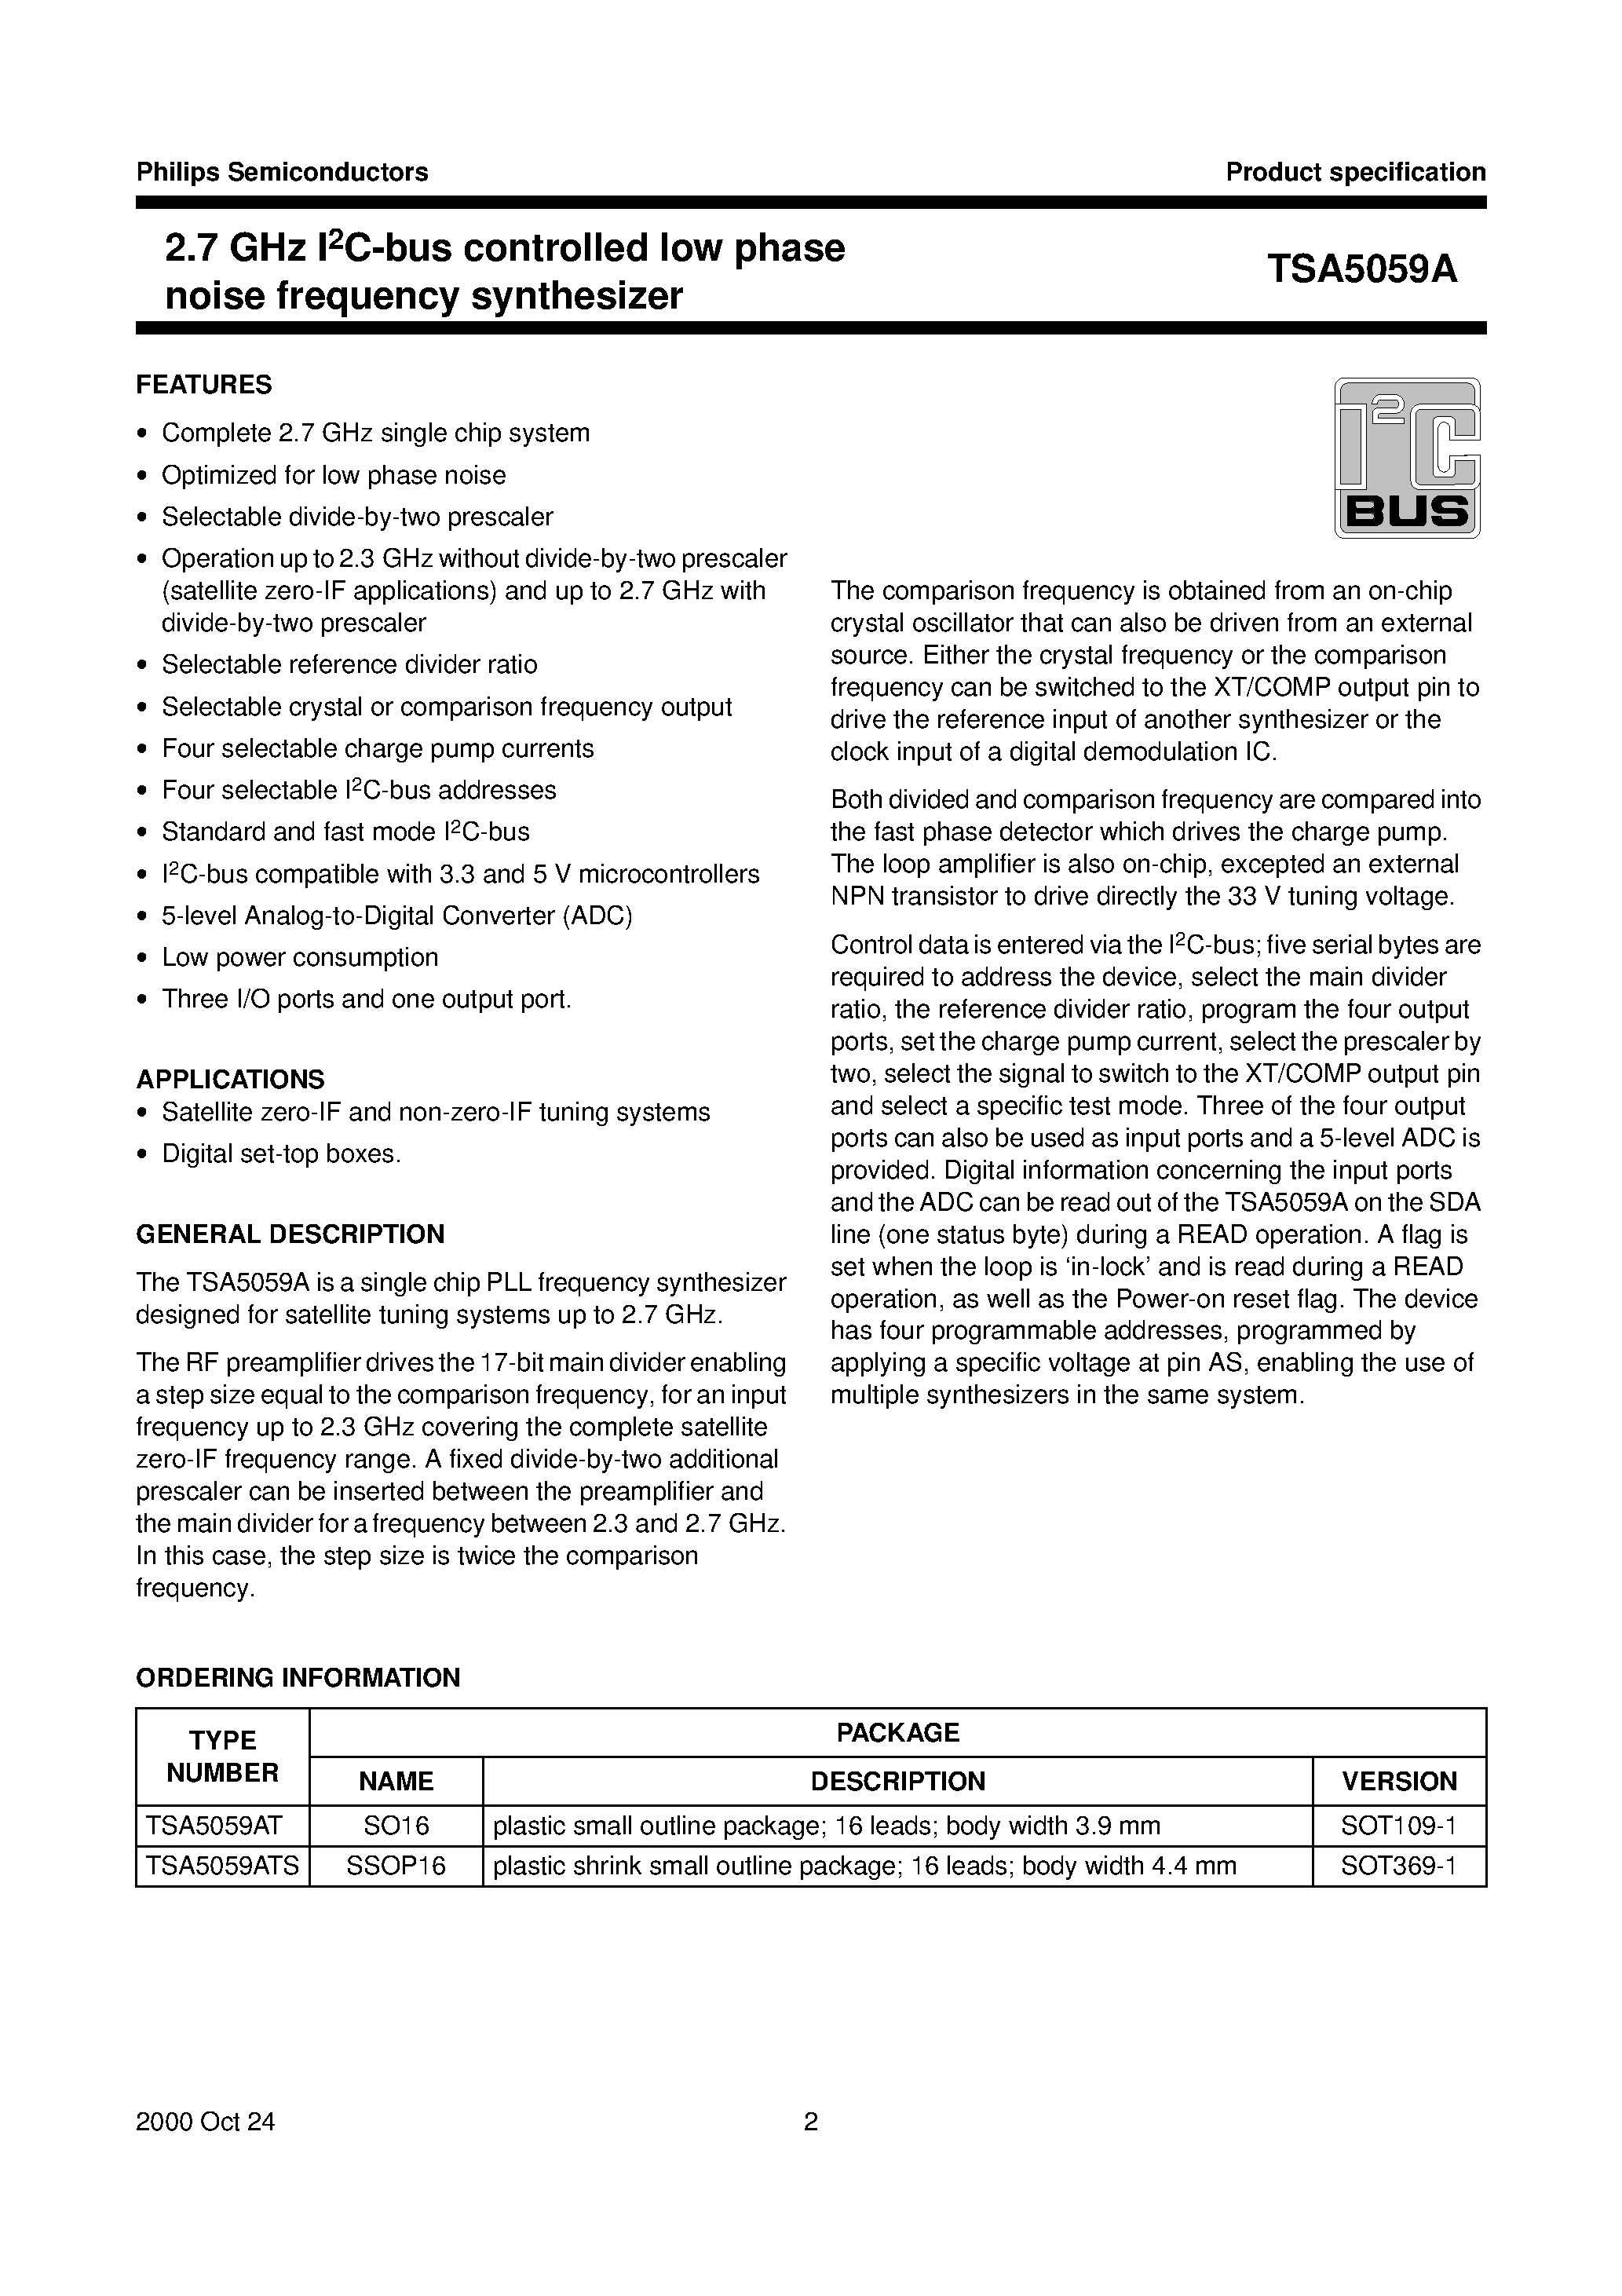 Datasheet TSA5059A - 2.7 GHz I2C-bus controlled low phase noise frequency synthesizer page 2